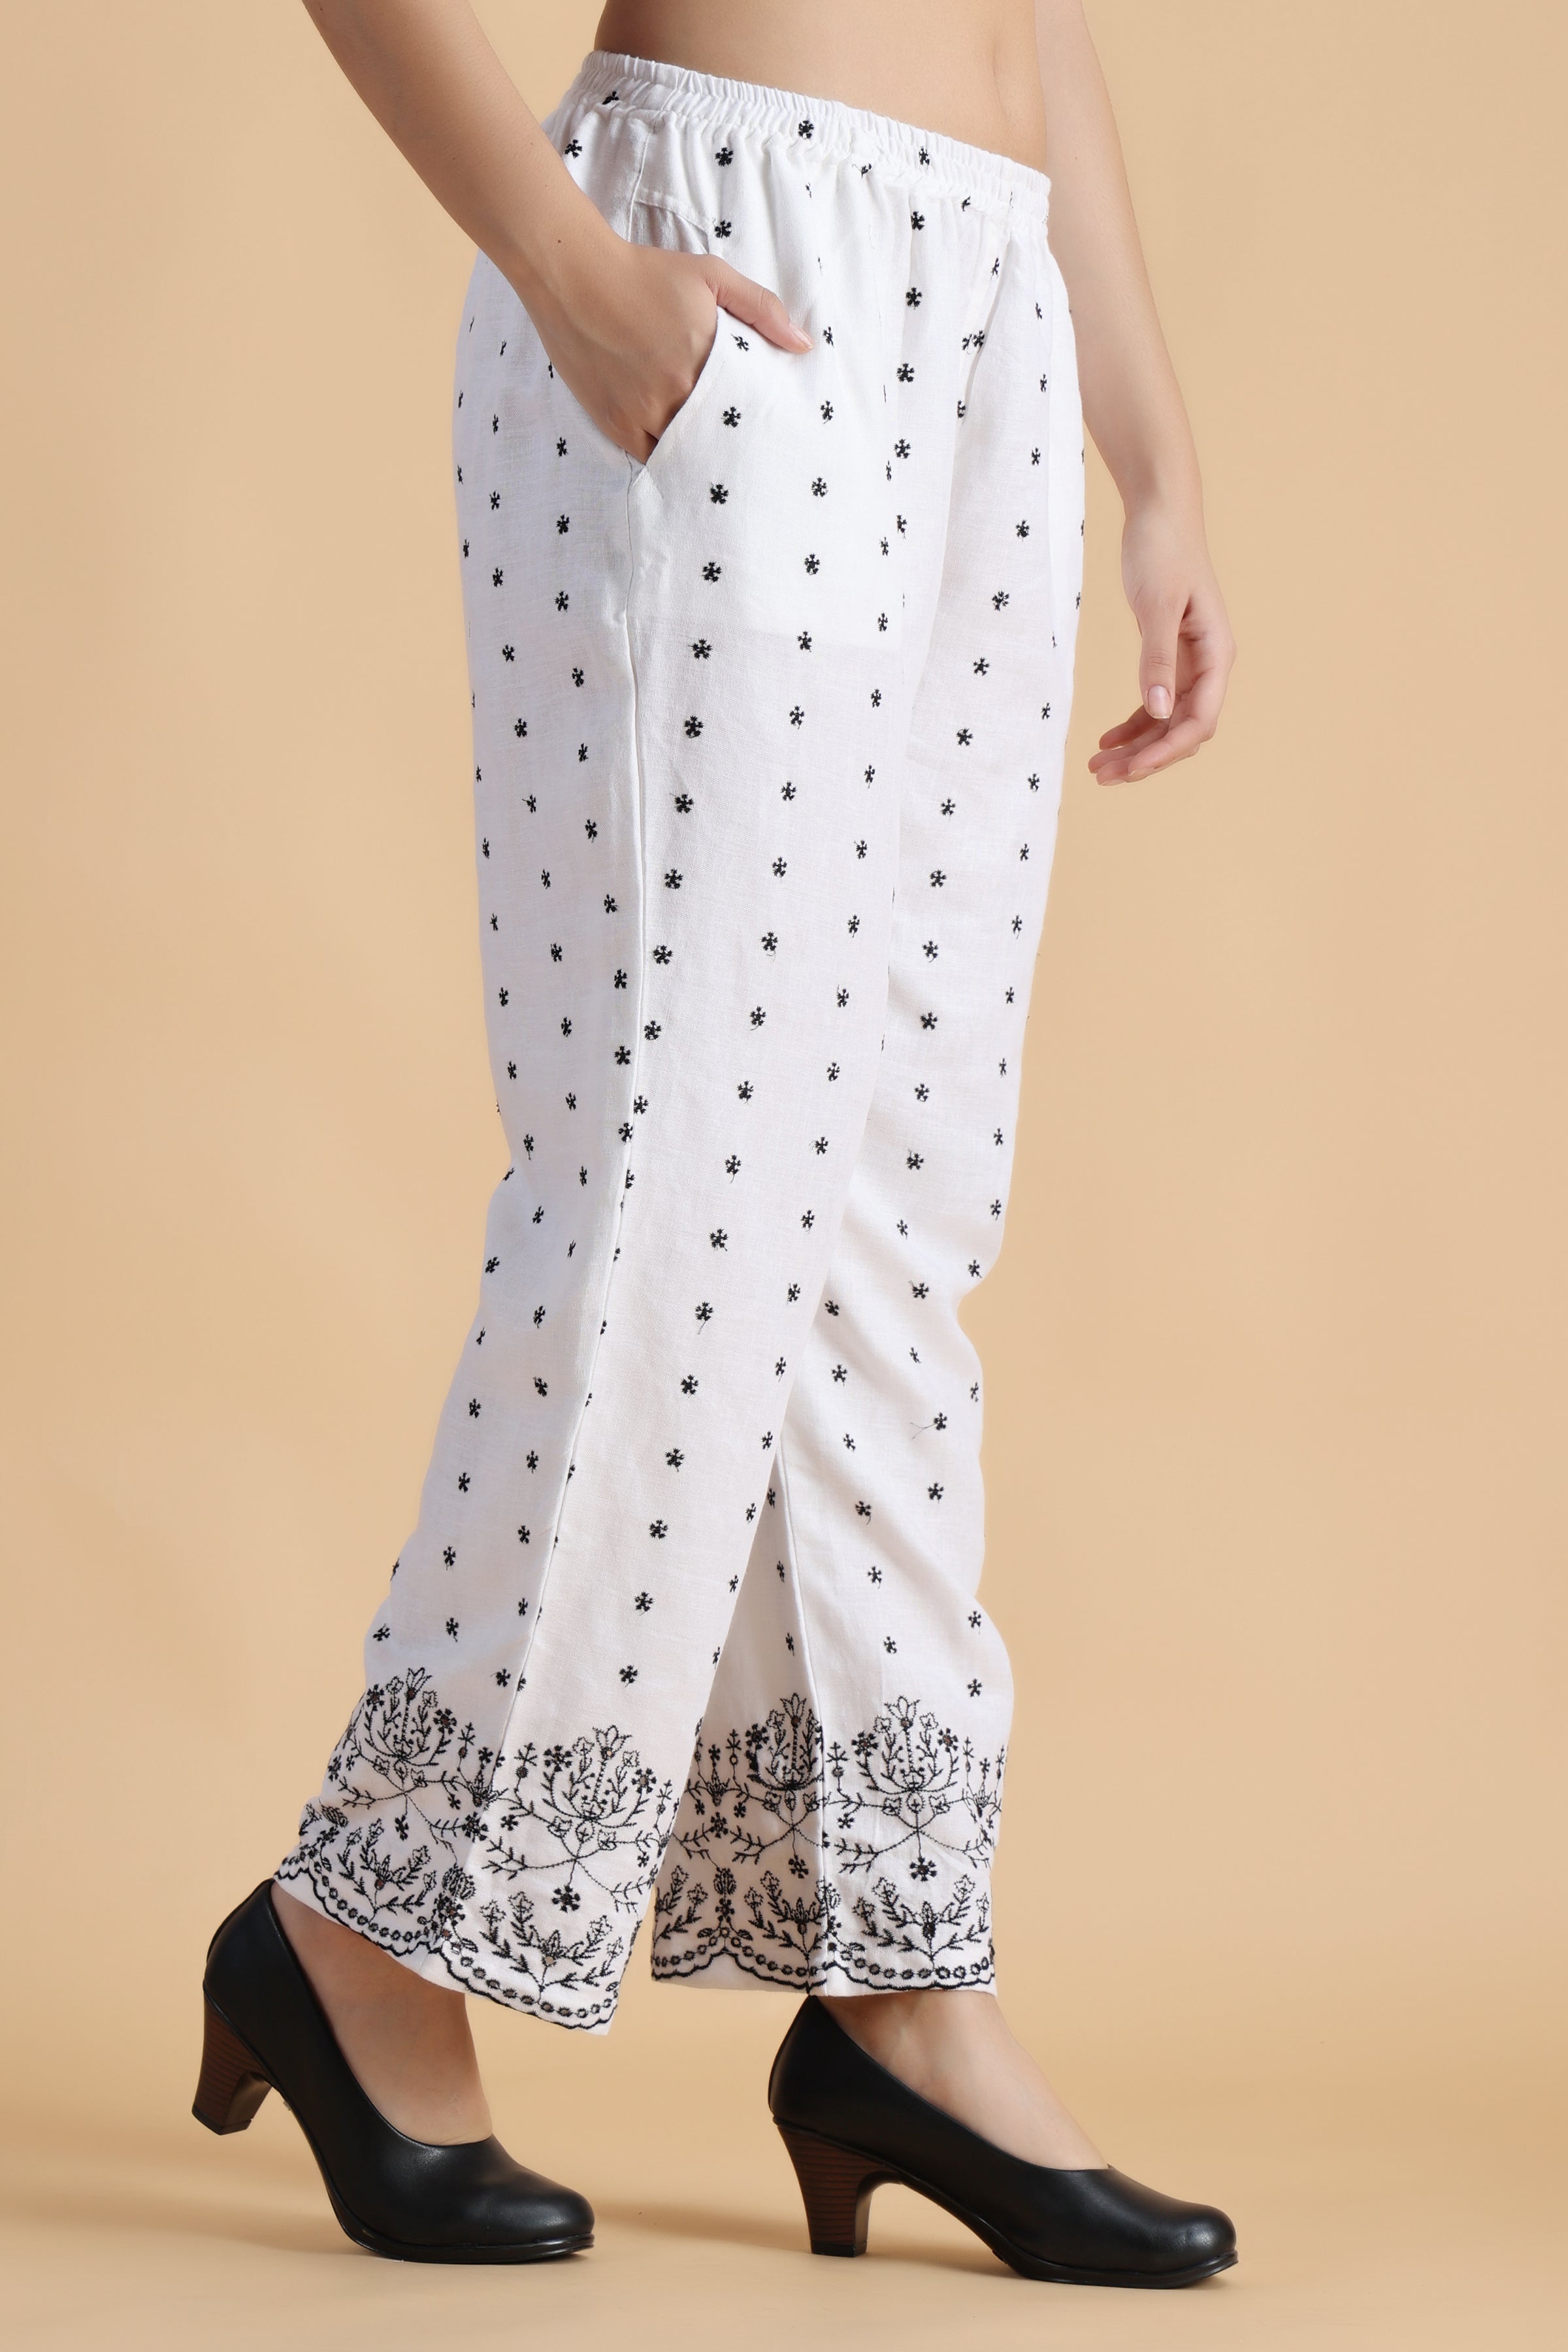 White WideLeg Pants are a Chic Closet Staple 